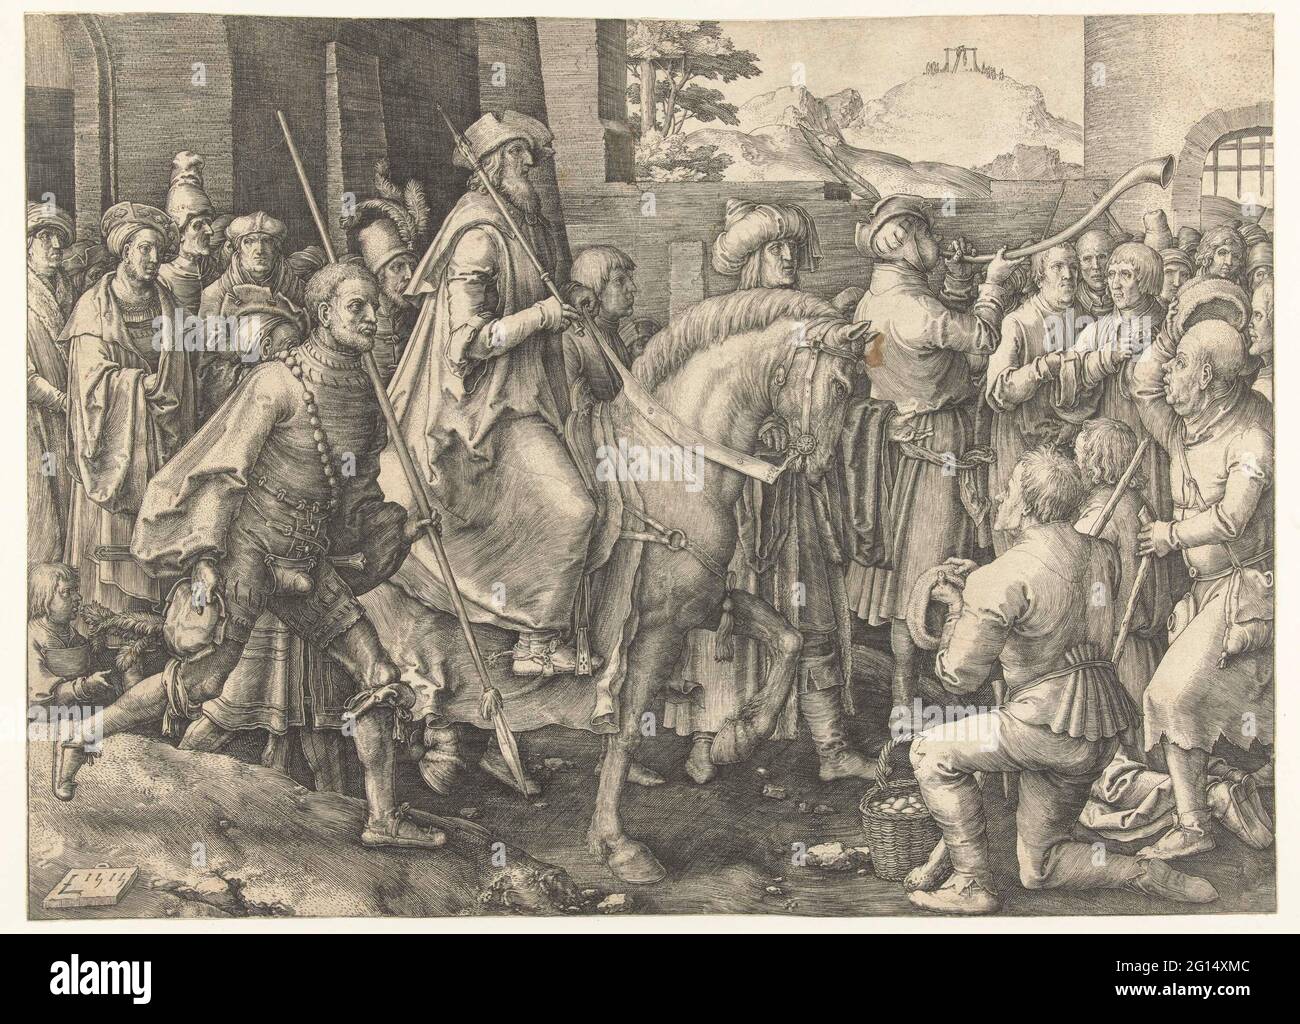 Triumph of Mordecai. Mordechai on horseback with effect and bystanders. On mountain gallows with hanging from Haman. Stock Photo